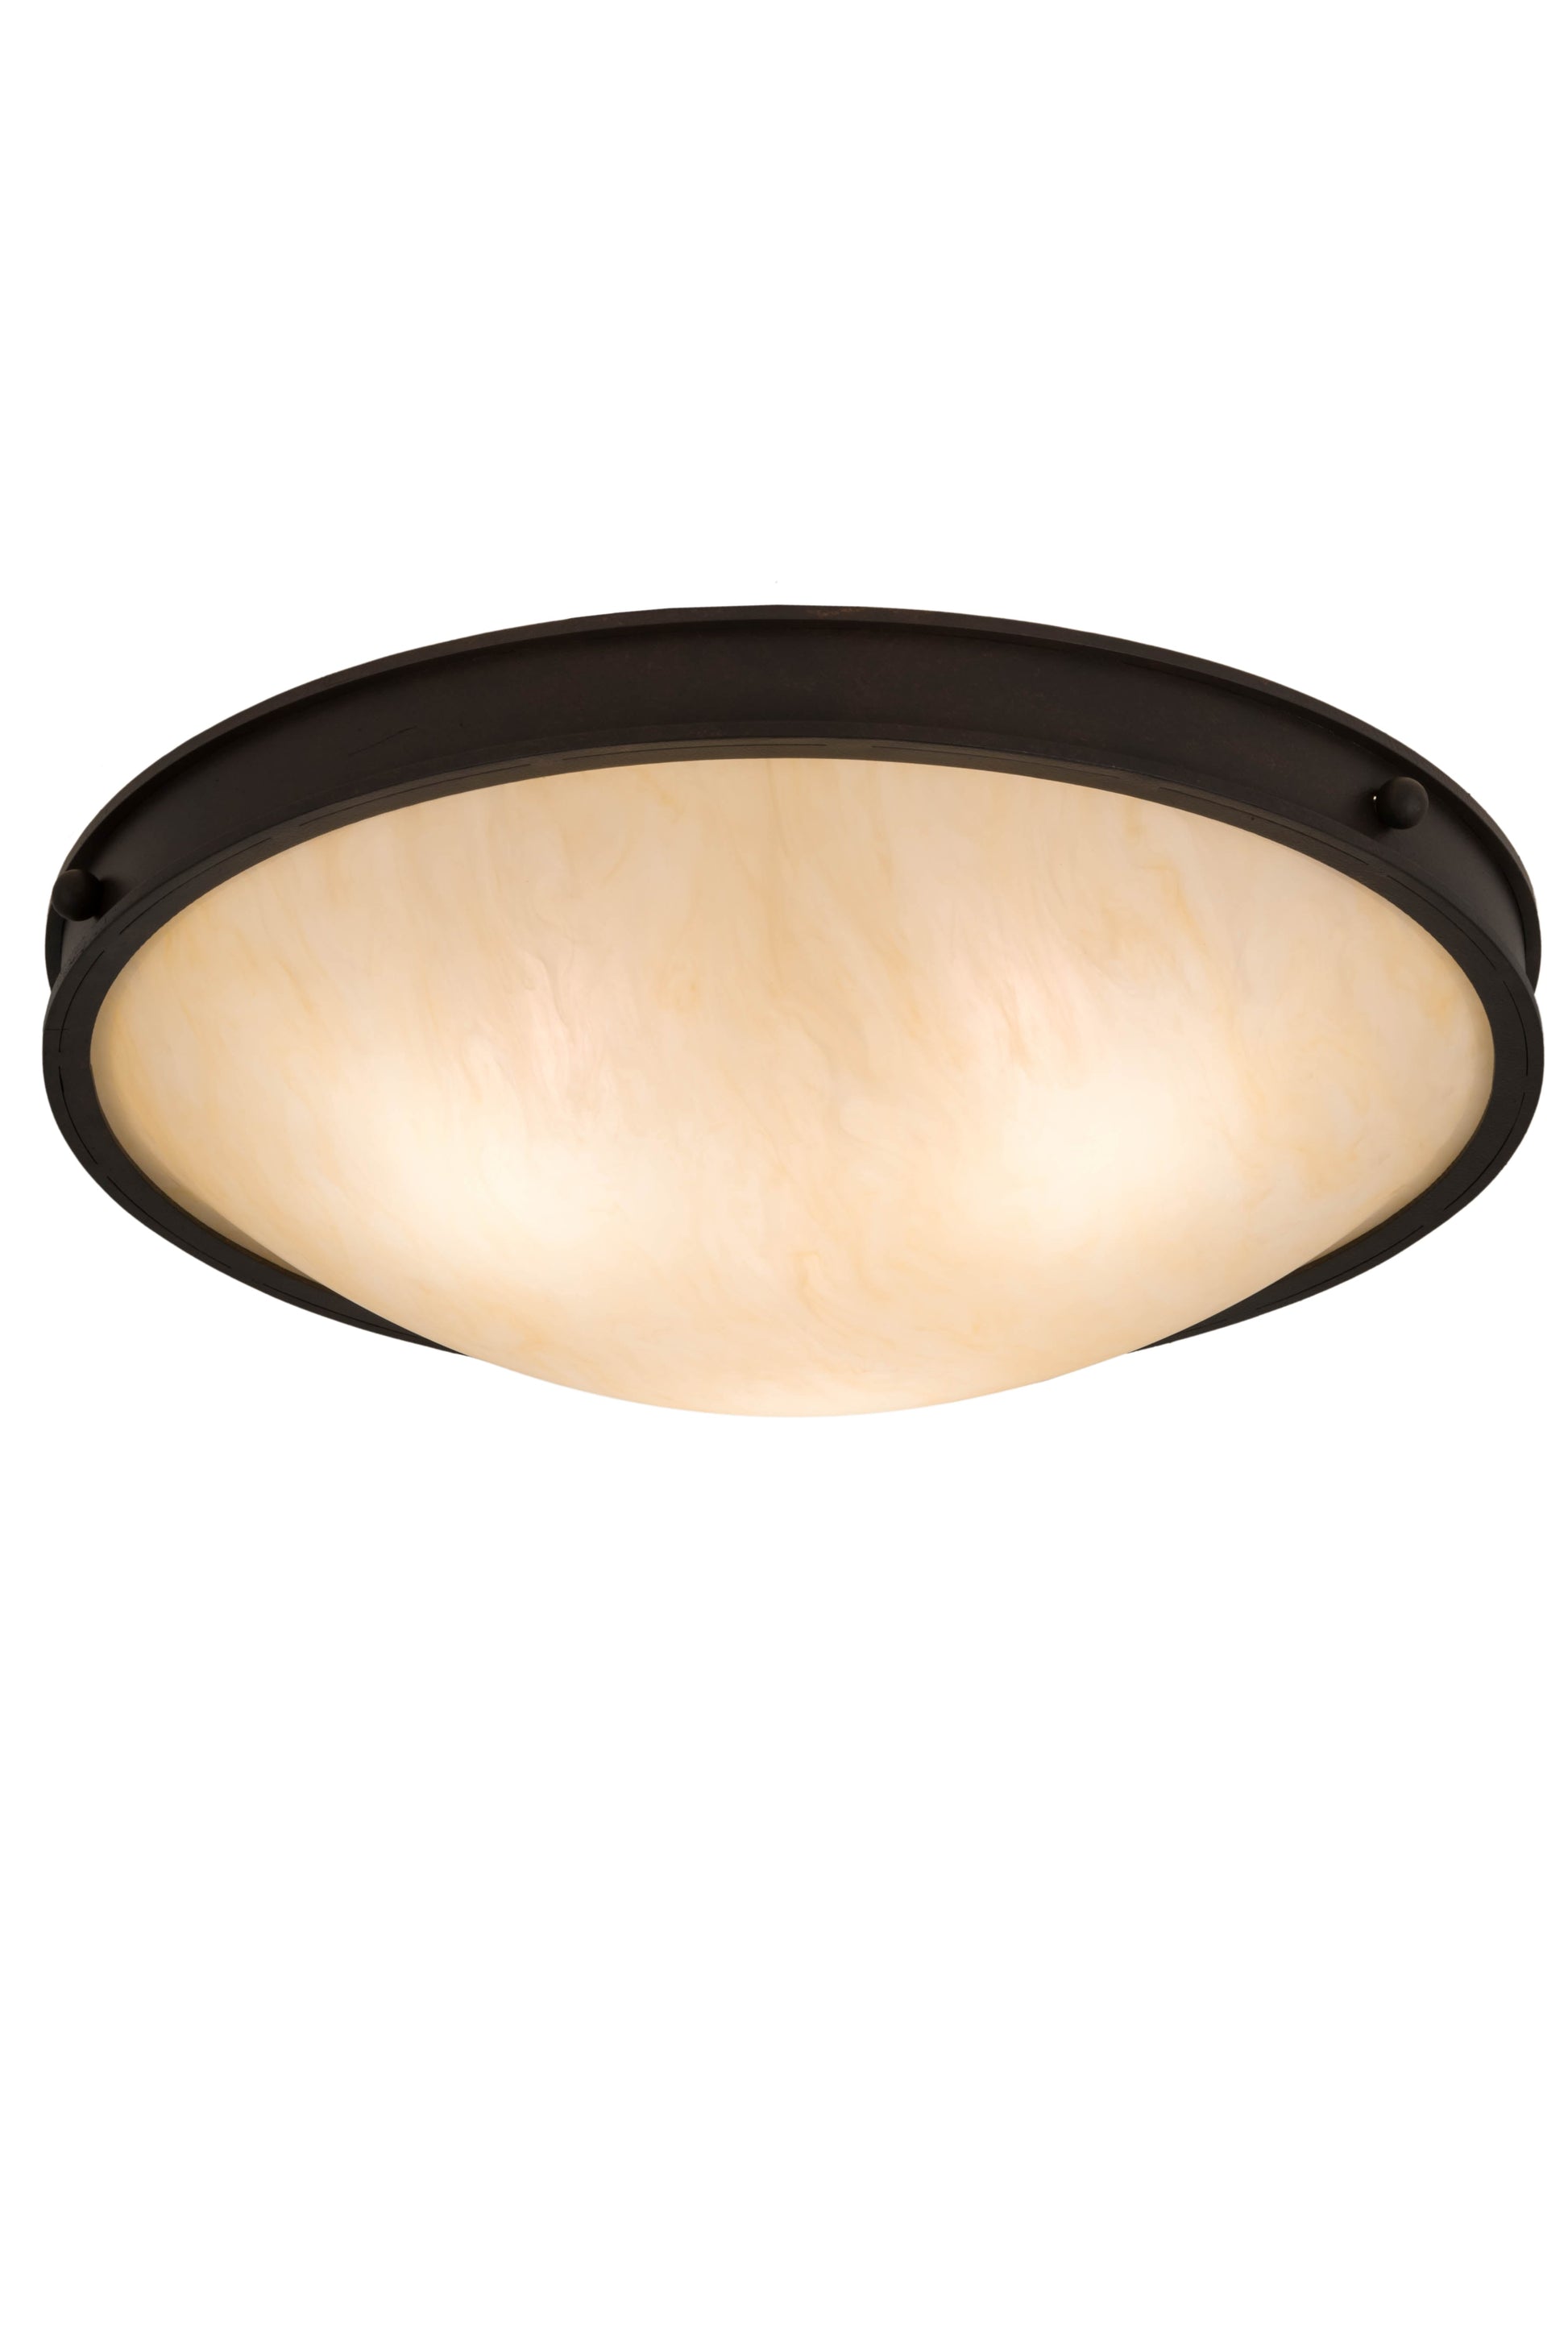 22" Dionne Flushmount by 2nd Ave Lighting